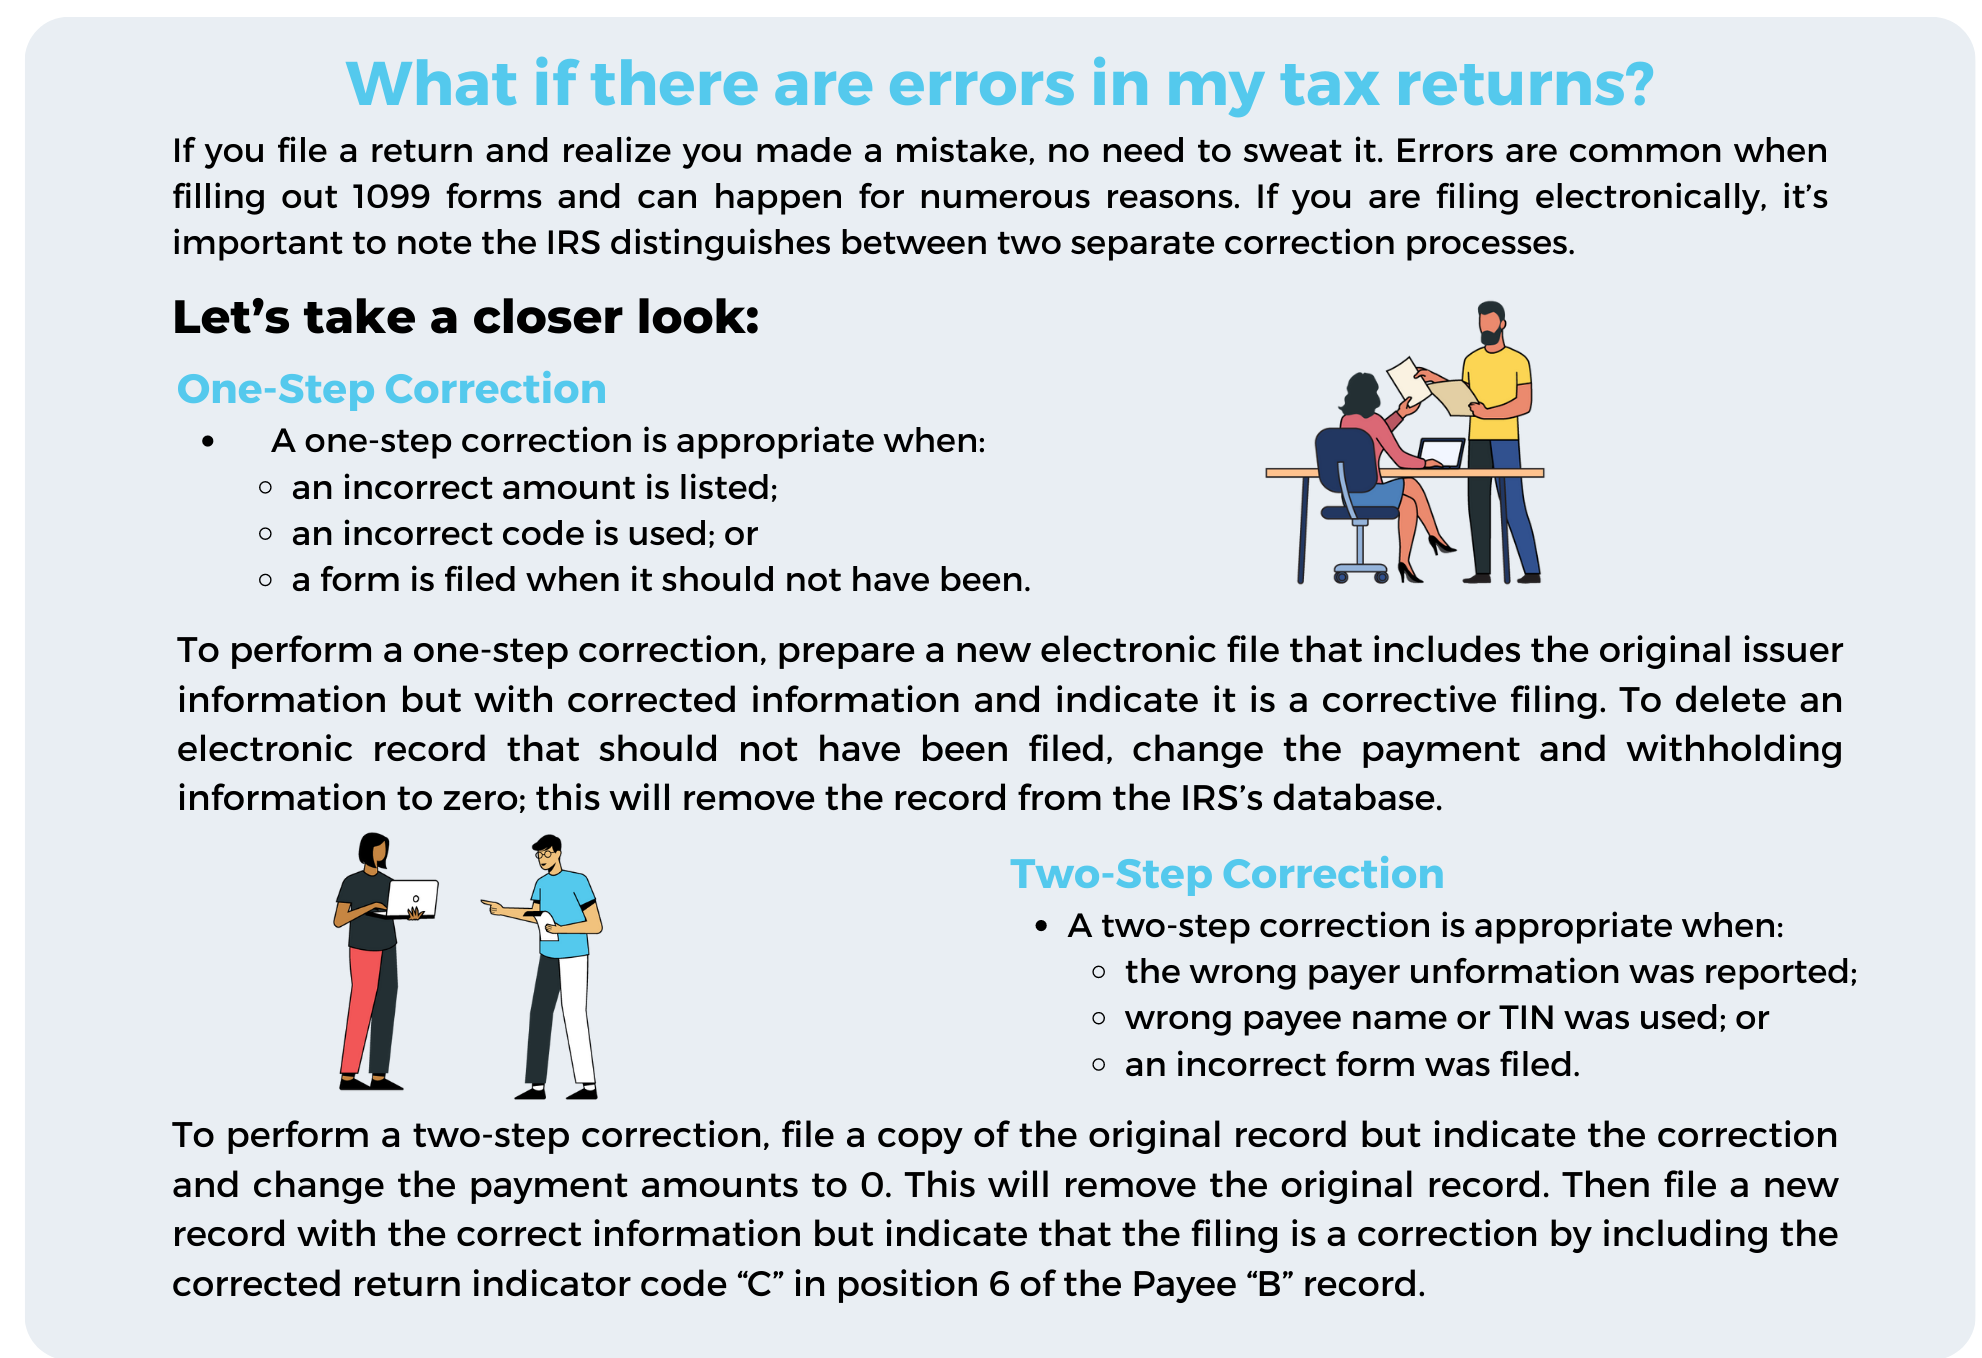 What If there are errors in my tax returns?